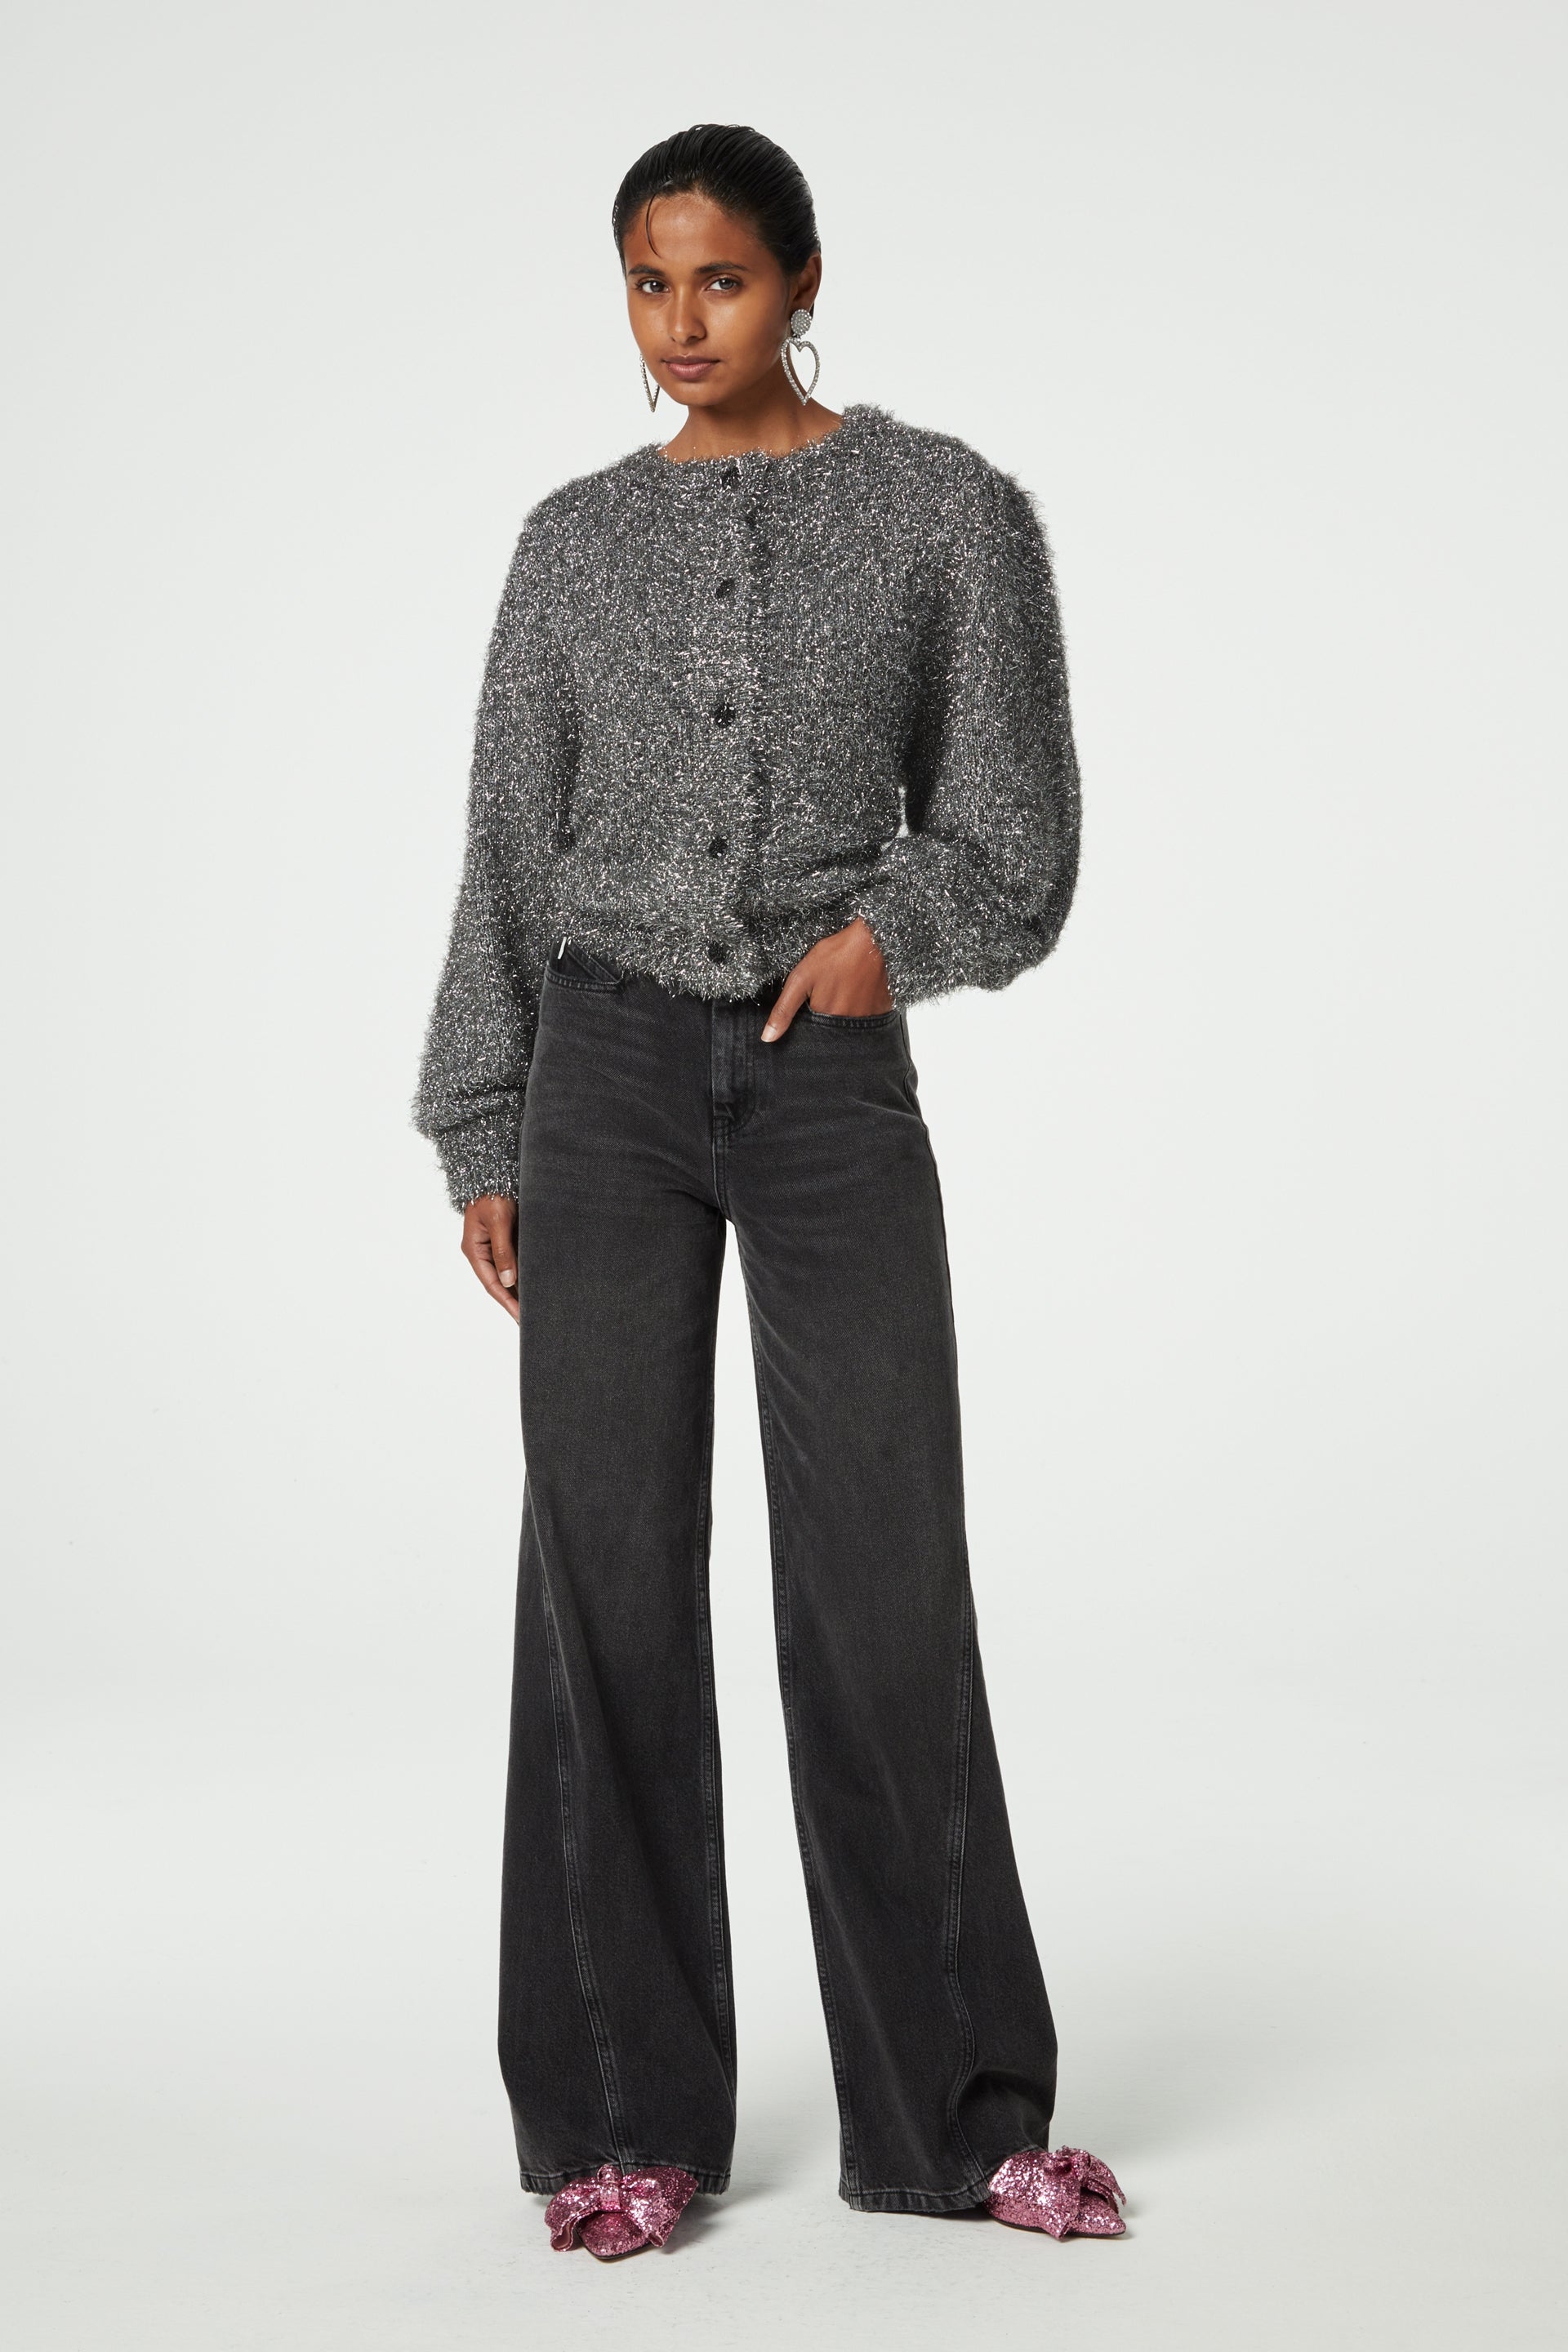 Silver tinsel effect knitted cardigan with wide sleeves crew neck and black button fastening